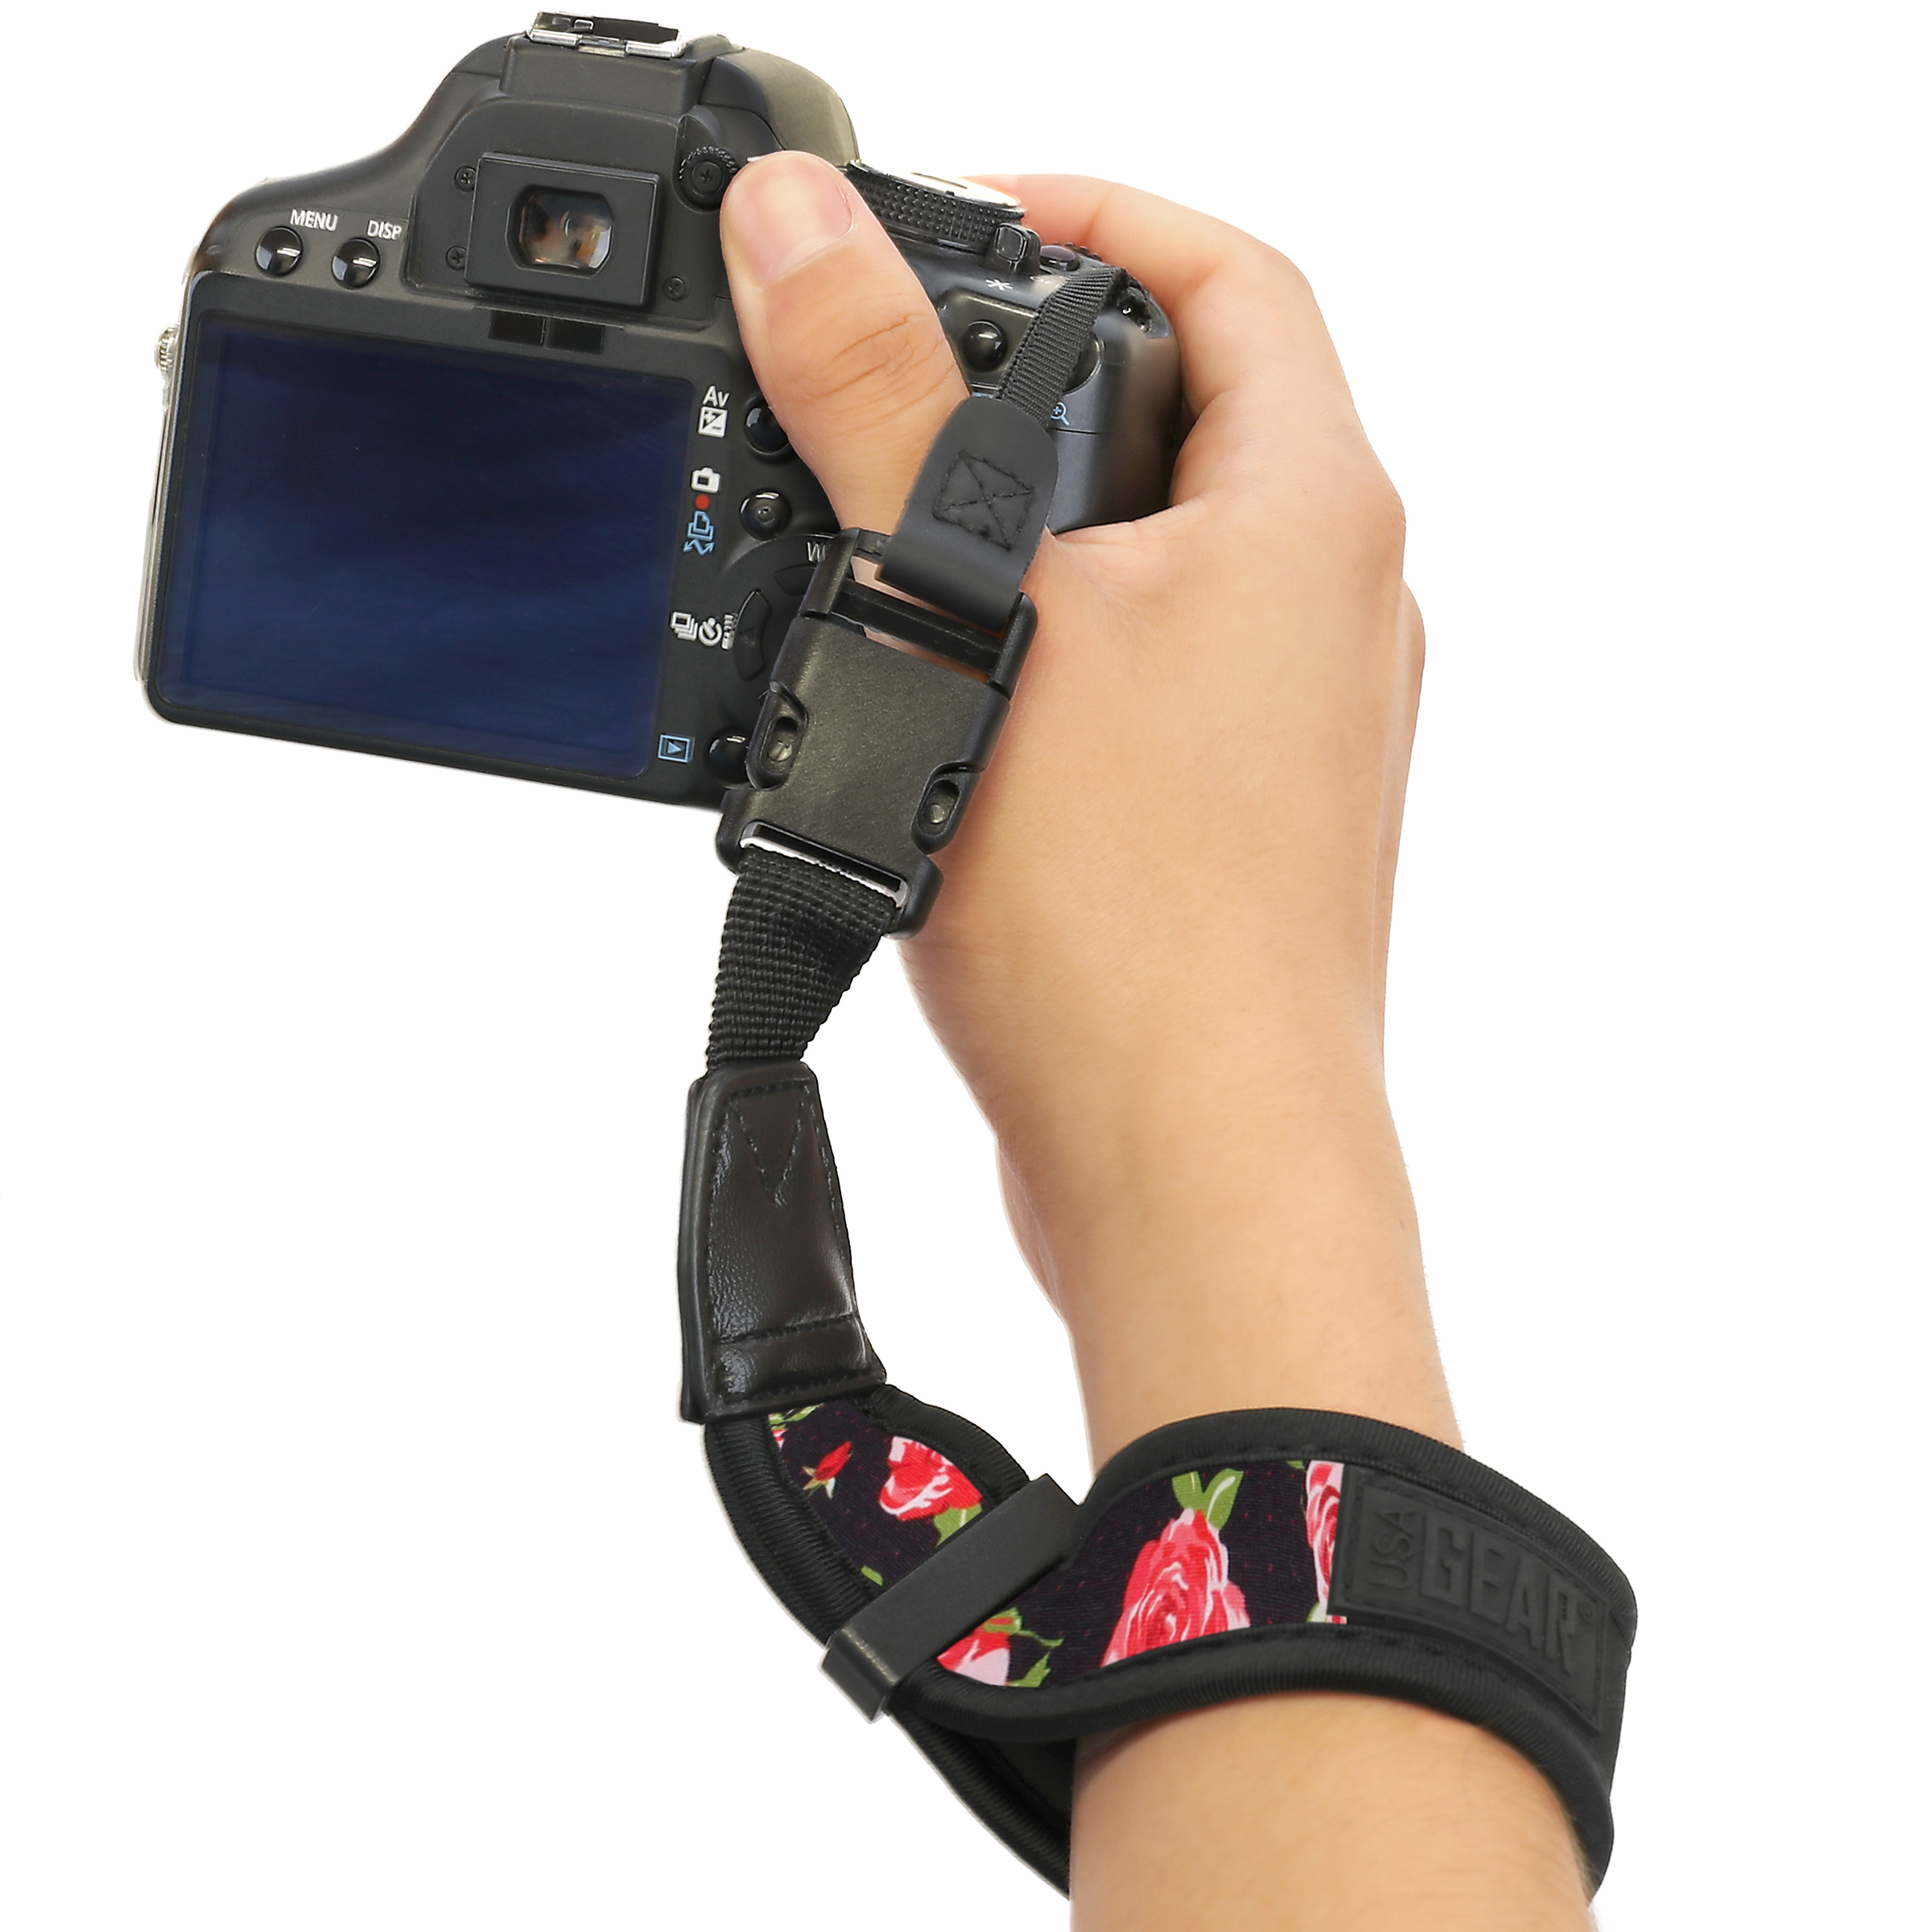 USA Gear Digital Camera Wrist Strap with Padded Neoprene Design and Quick Release Buckle System - image 1 of 9